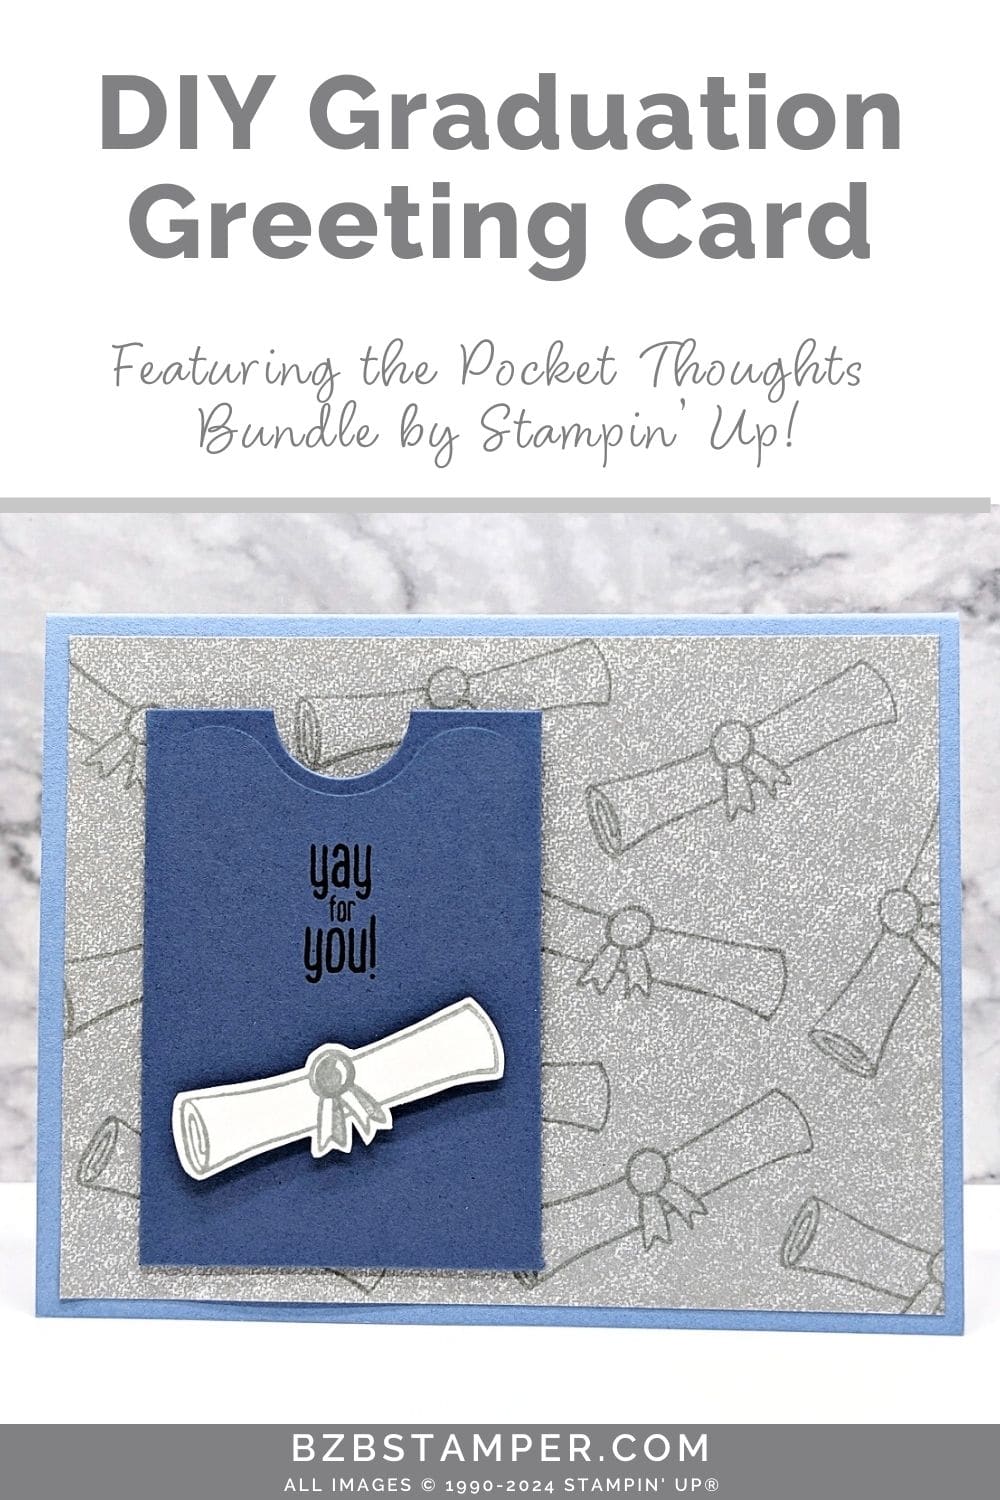 Handmade Graduation Cards using the Pocket Thoughts Bundle in blues and grays.  Has a scroll on front of the gift card holder pocket with a "yay for you" sentiment.